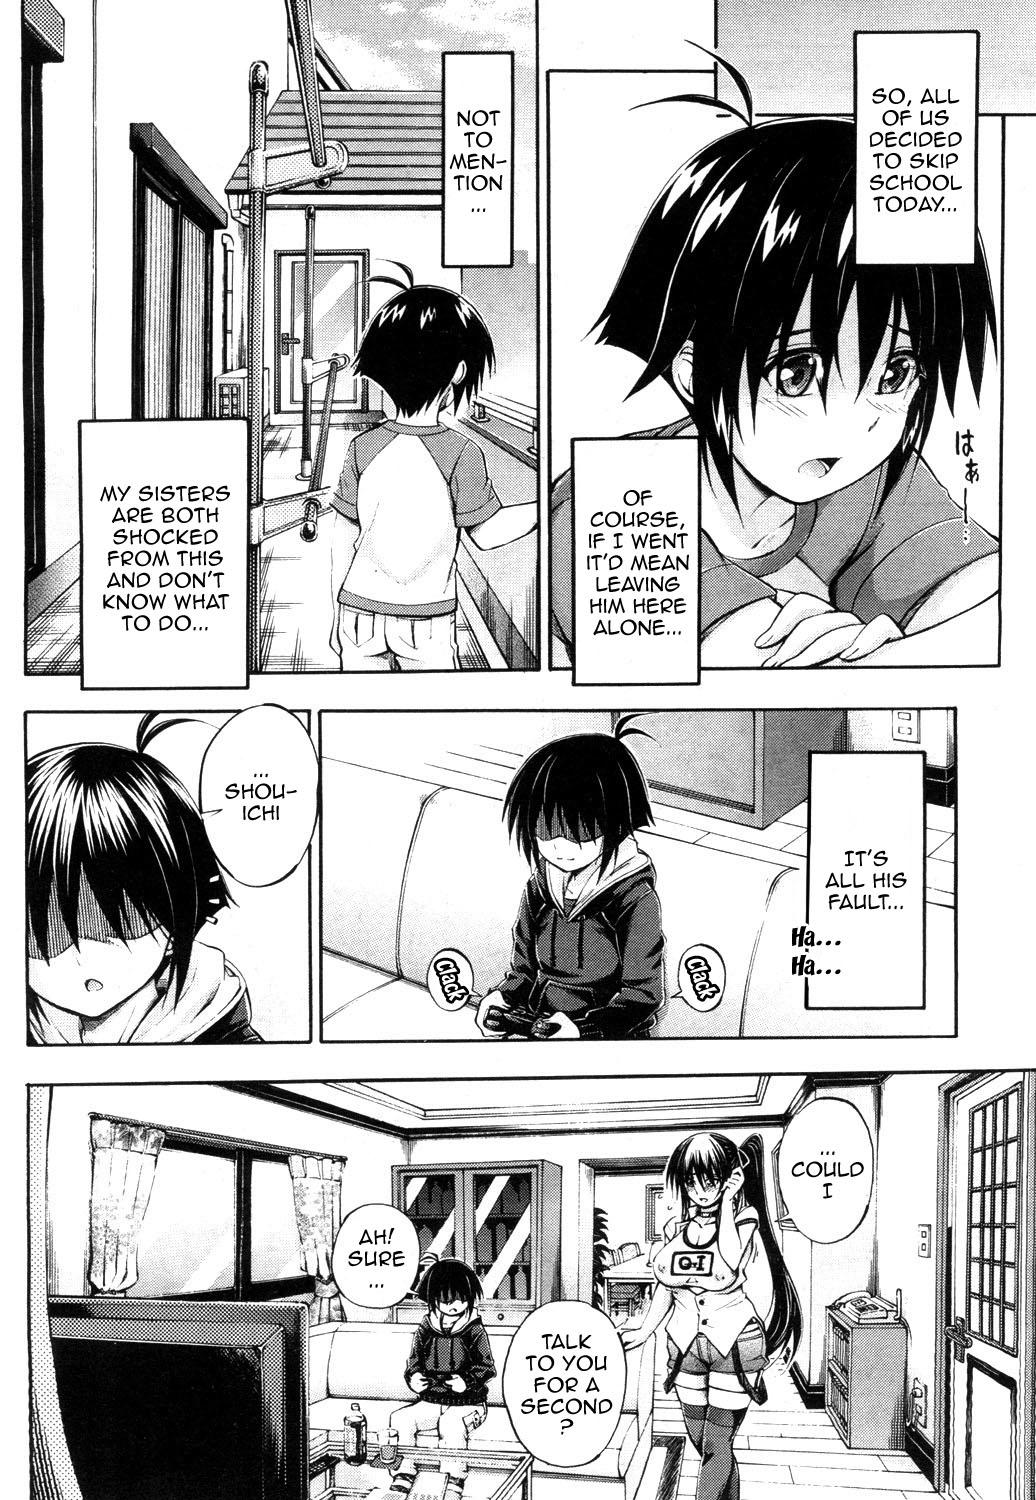 Doppel wa Onee-chan to H Shitai! Ch. 2 | My Doppelganger Wants To Have Sex With My Older Sister Ch. 2 8